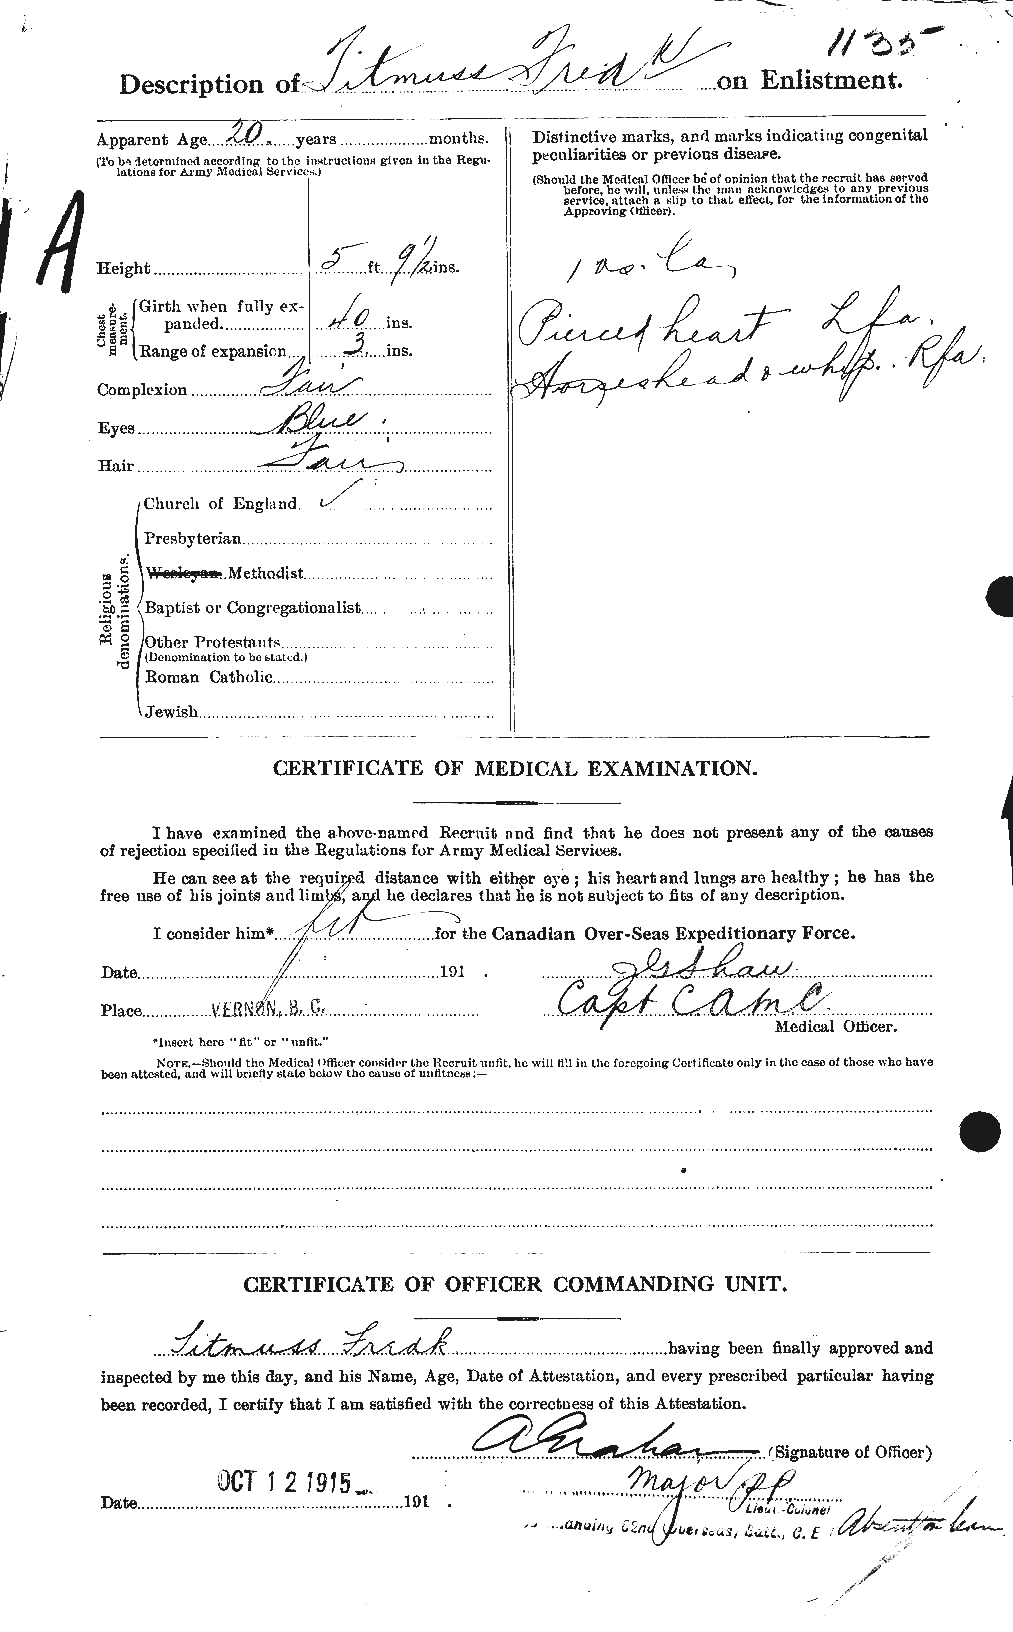 Personnel Records of the First World War - CEF 634911b